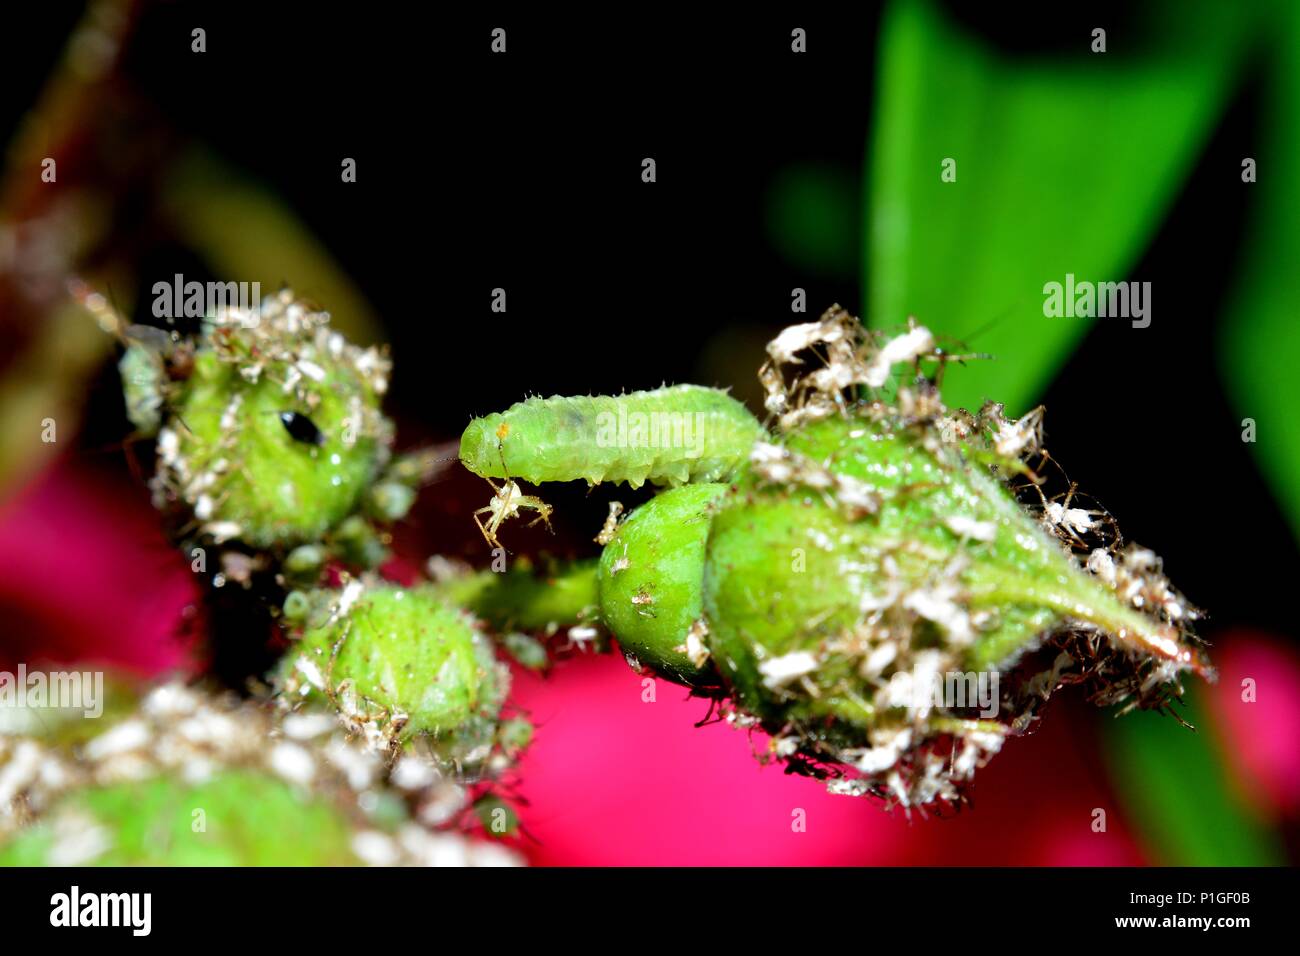 Green caterpillar eats an aphid, sits on rosebud Stock Photo